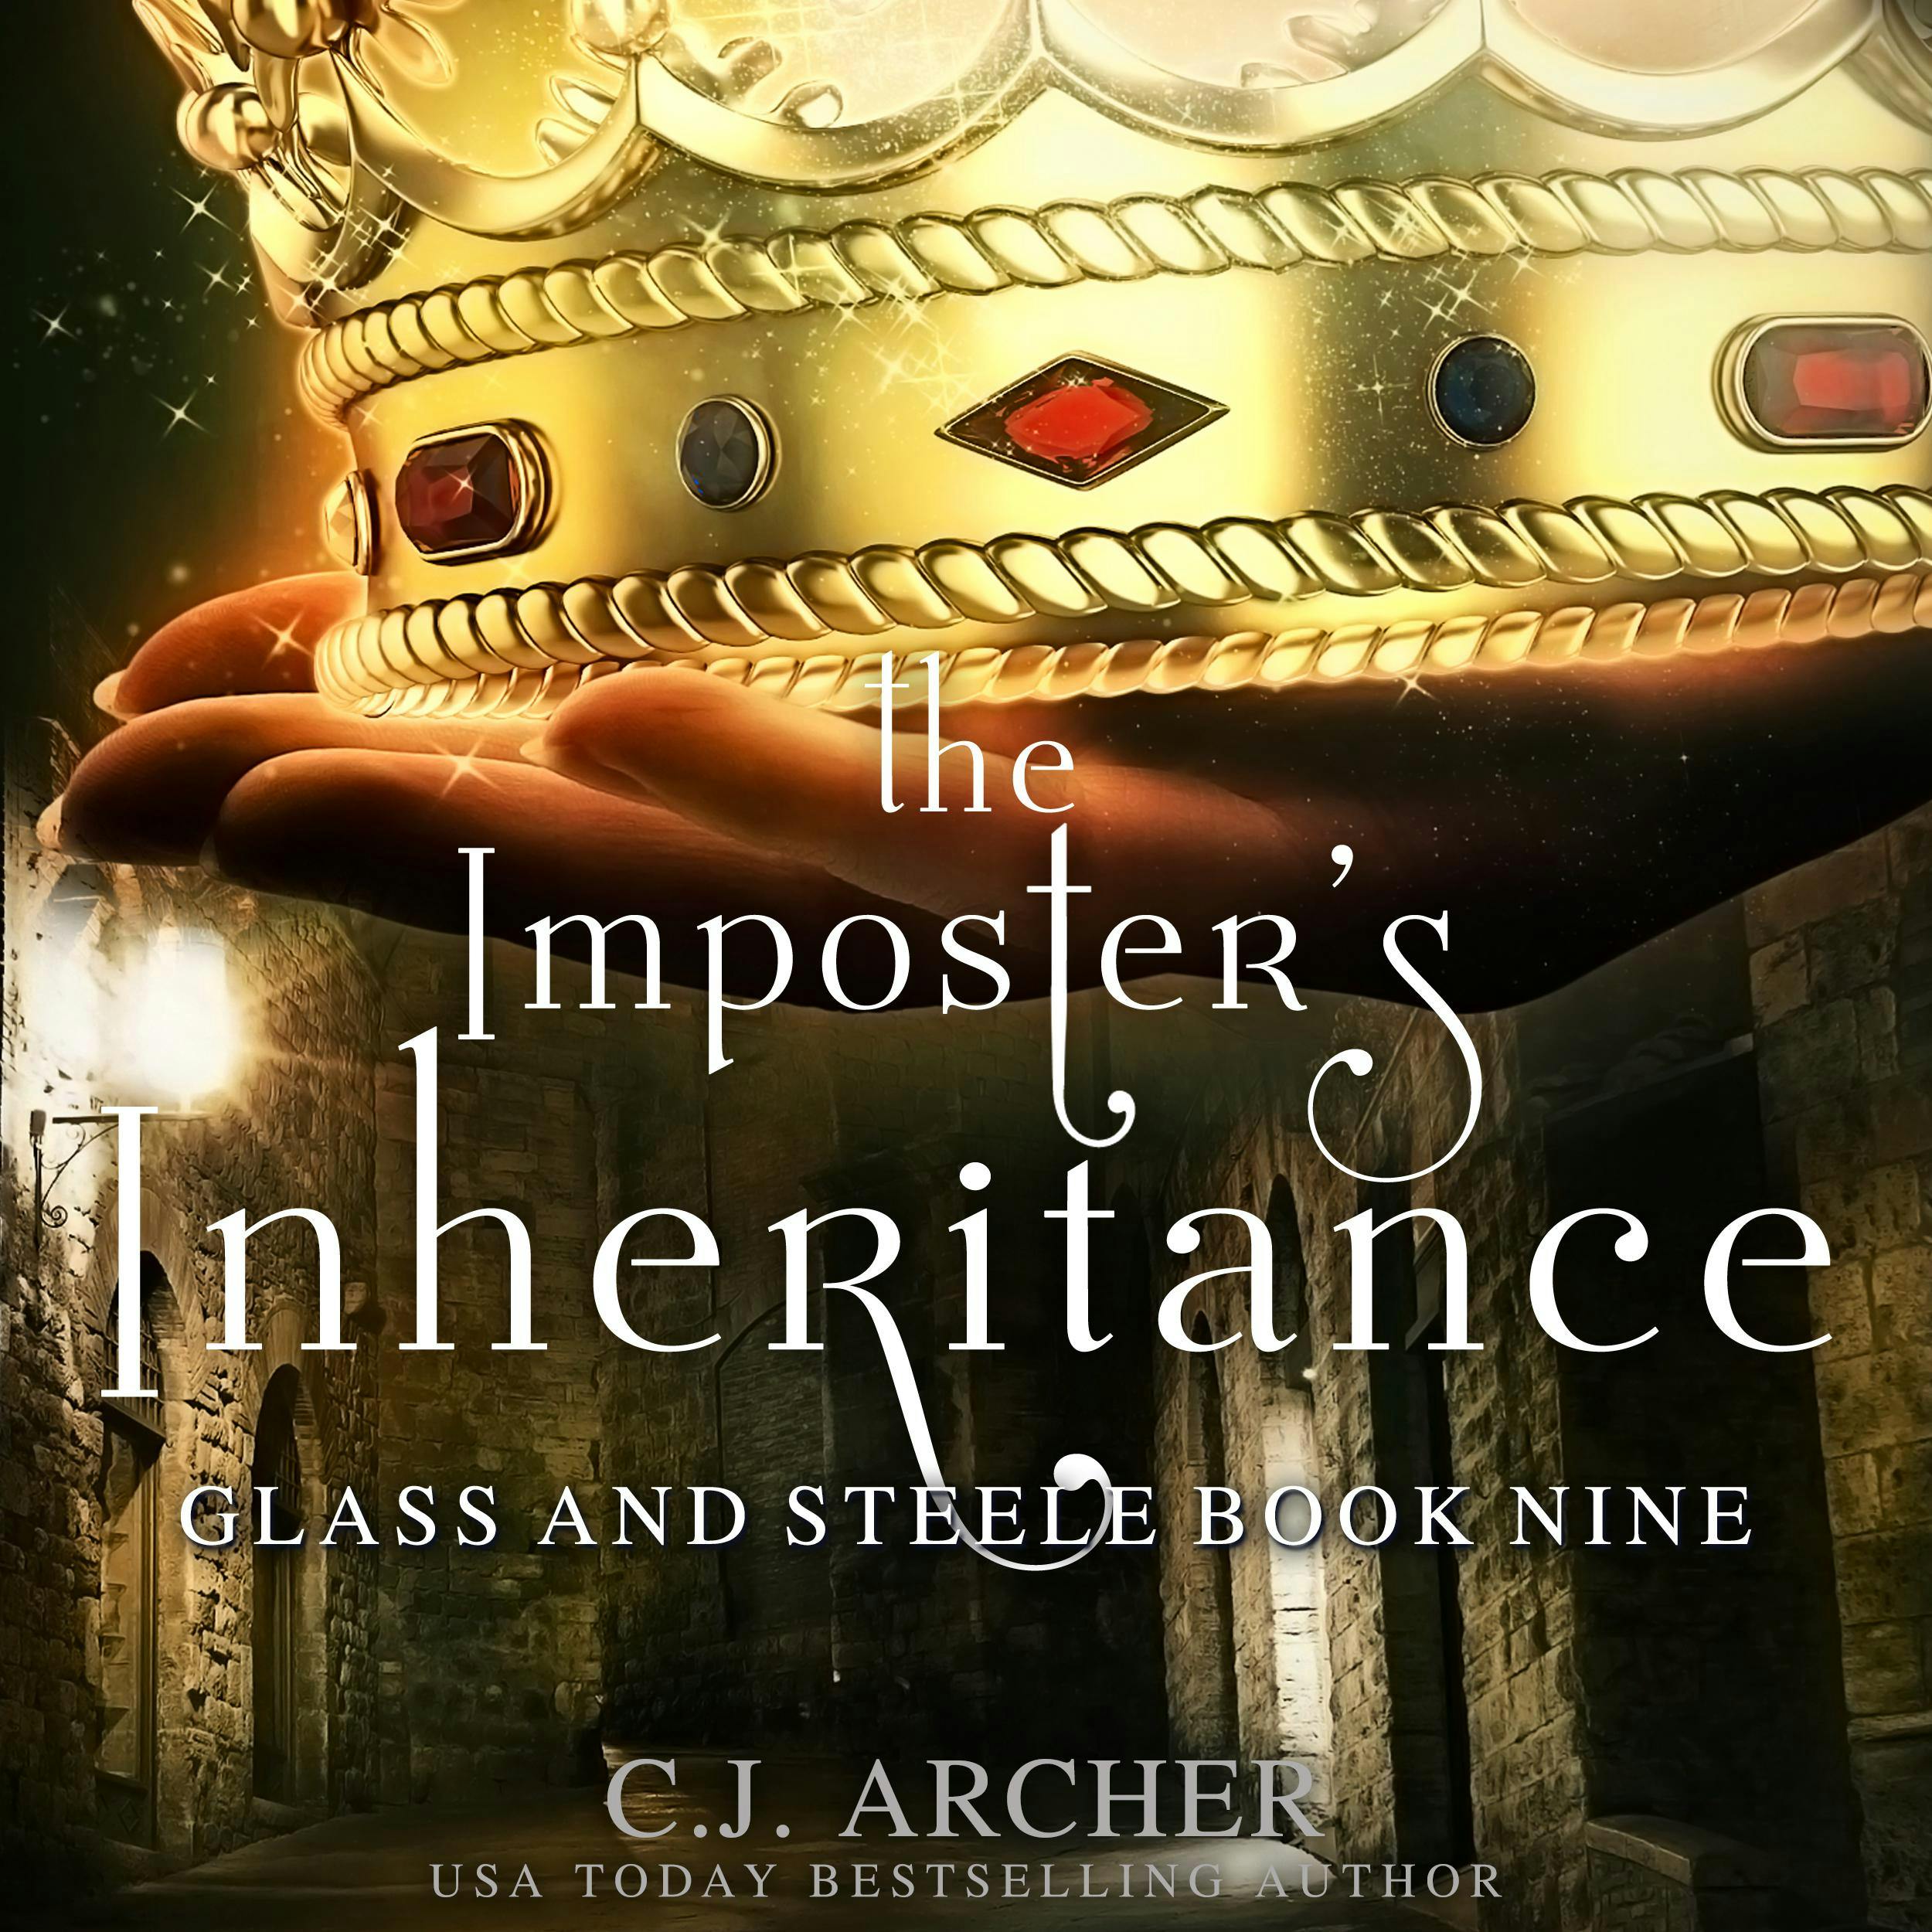 The Imposter's Inheritance: Glass And Steele, book 9 - C.J. Archer